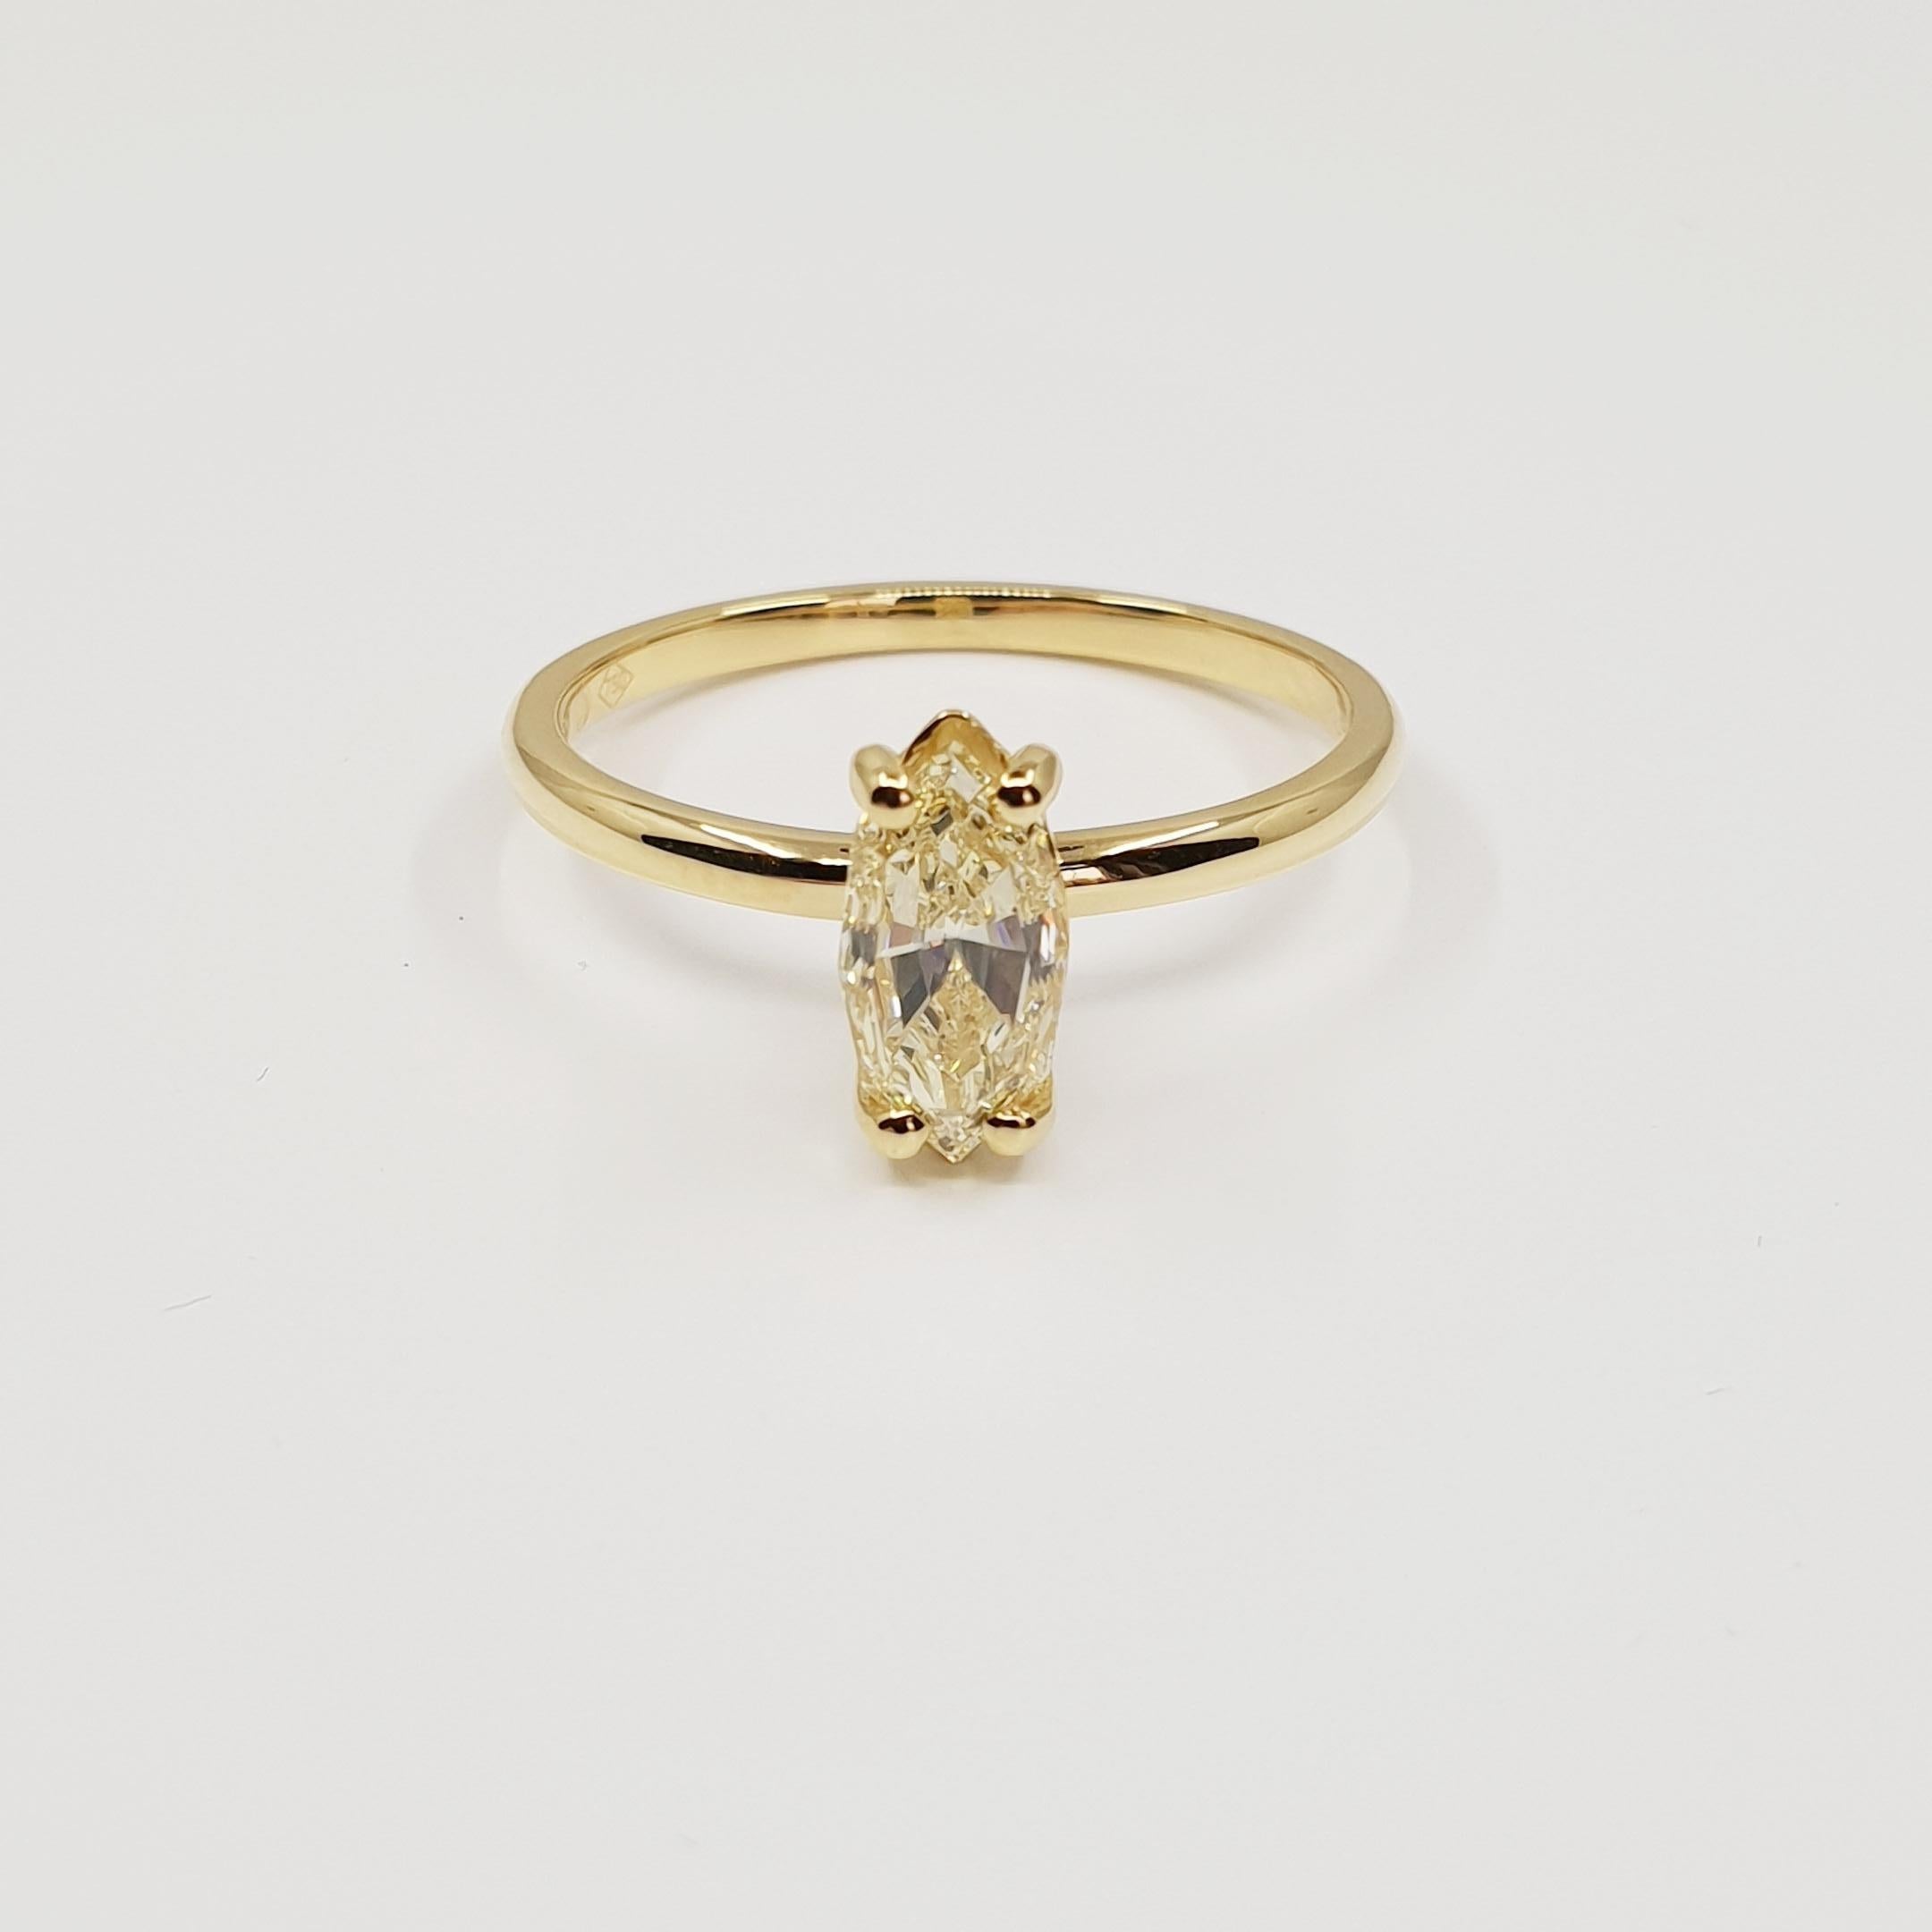 GIA Certified 1.02 Carat S-T/SI1 Marquise Diamond Ring 750 Yellow Gold

750 Gold Solitaire Ring with Marquise GIA Certified Diamond, in High Gloss Polish.   
Four Prong Setting. Size 54.

5 C's:
Certificate: GIA
Carat: 1.02ct
Color: S-T
Clarity: